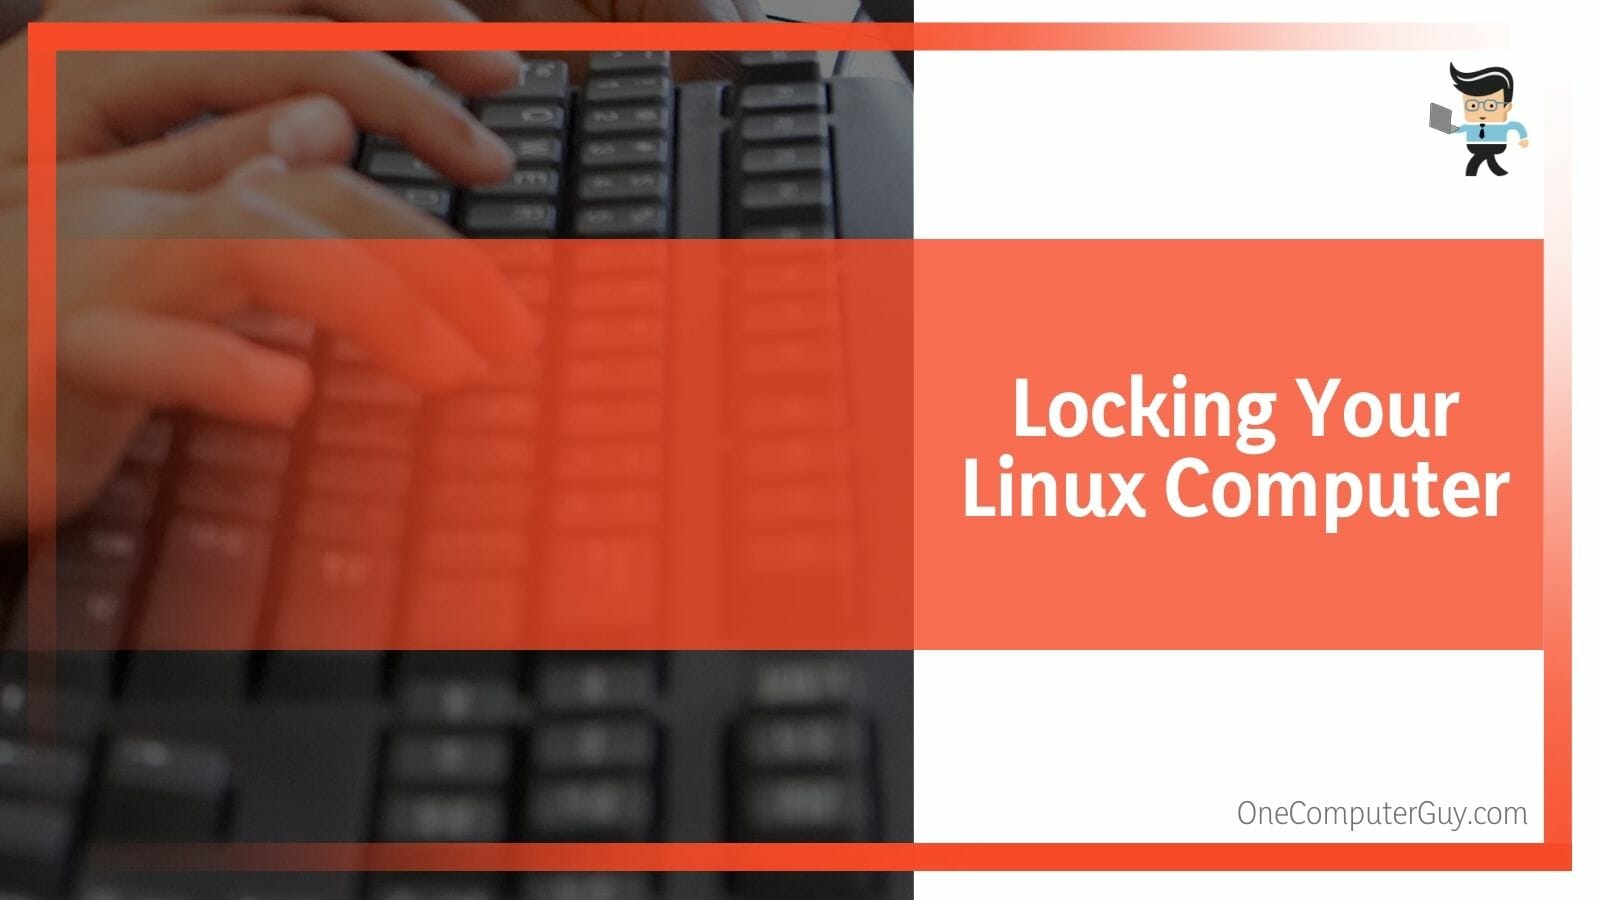 Locking Your Linux Computer